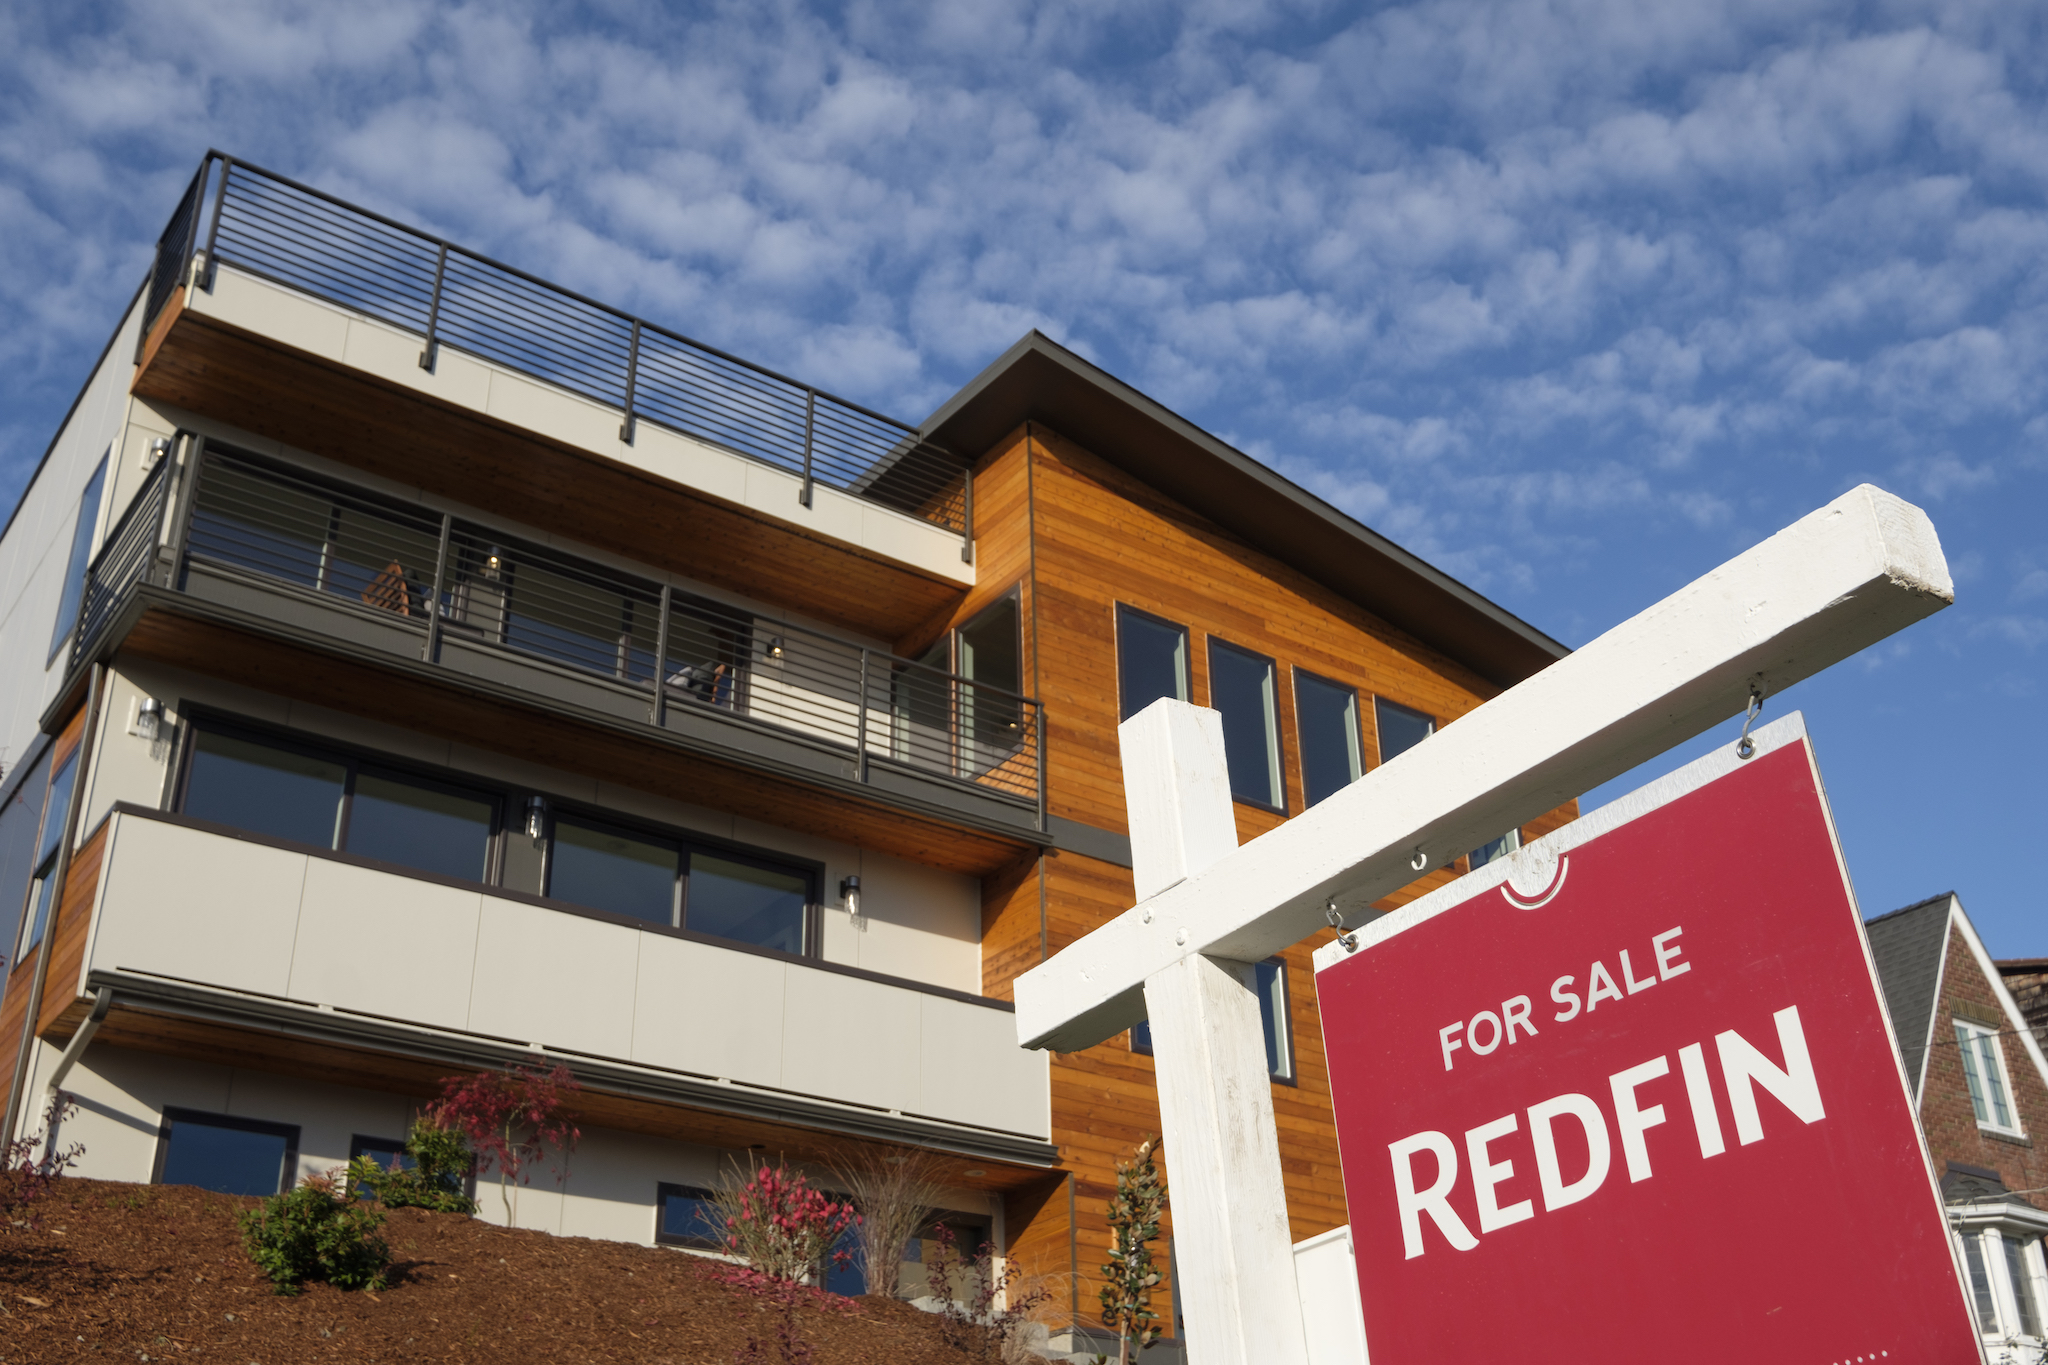 Compass Redfin both announce layoffs amid slowing housing market nationwide – SFGATE